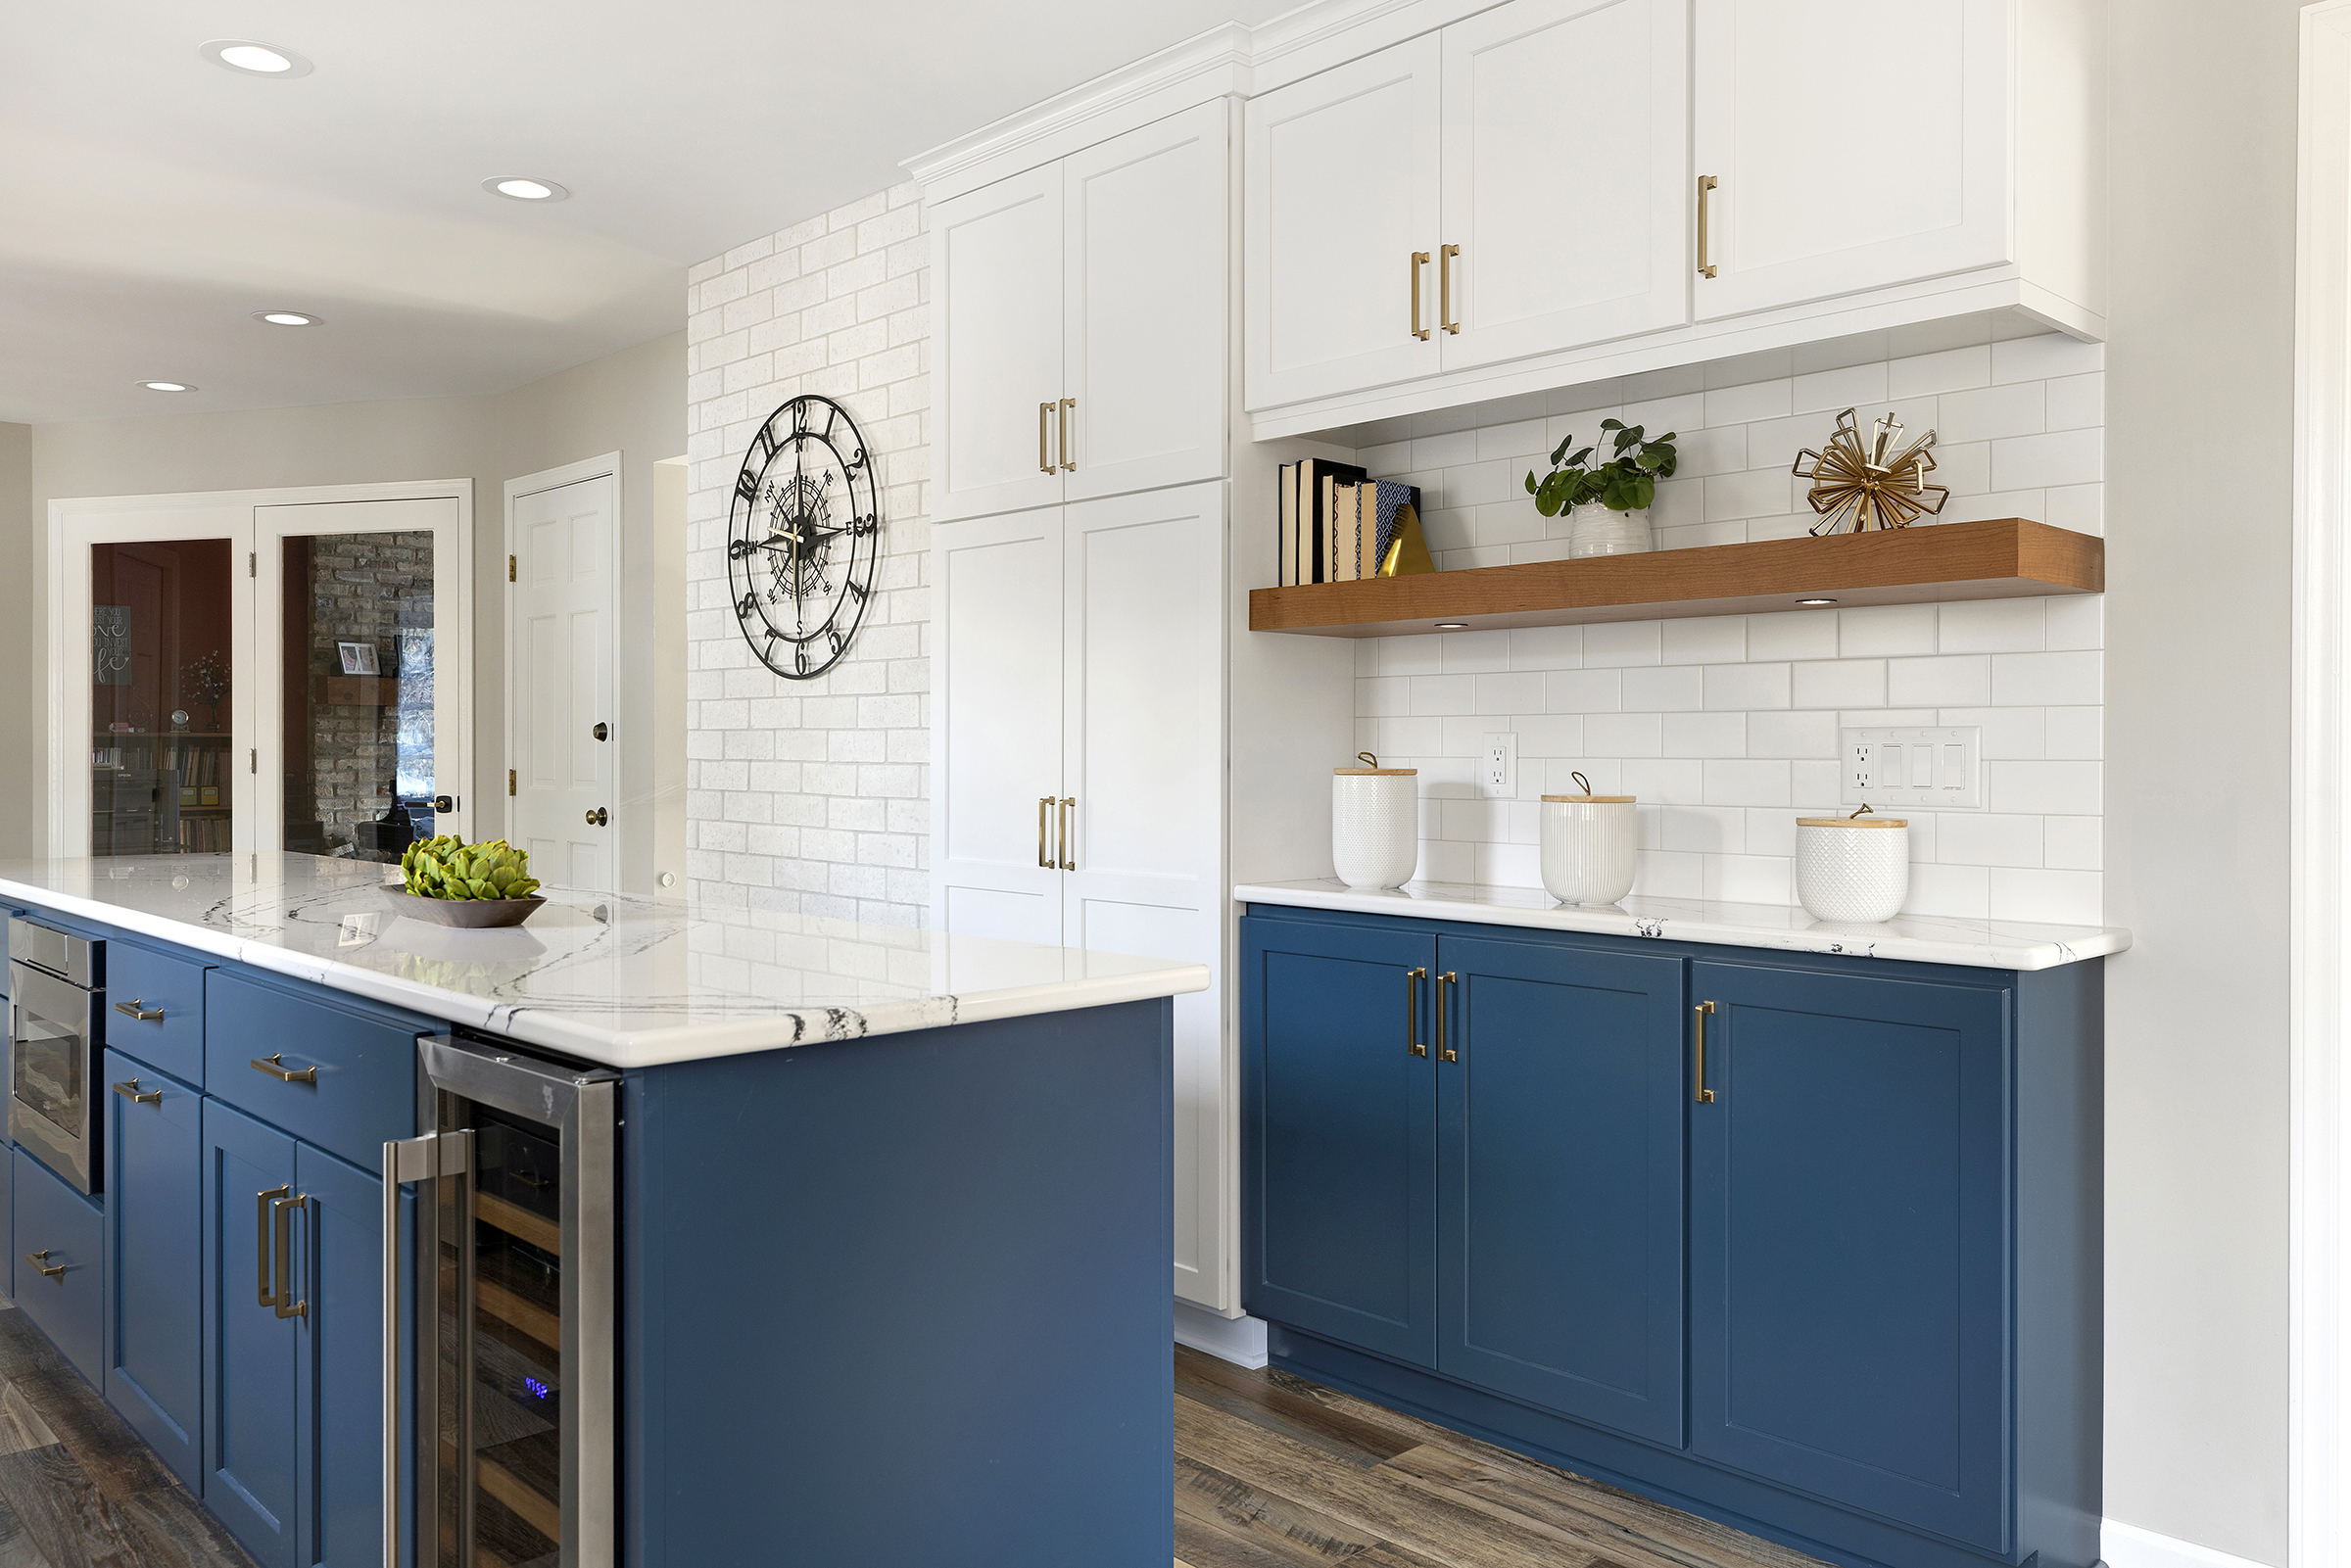 Kitchen remodel with blue base cabinets, white tall cabinets, floating wood shelf, and white subway tiles